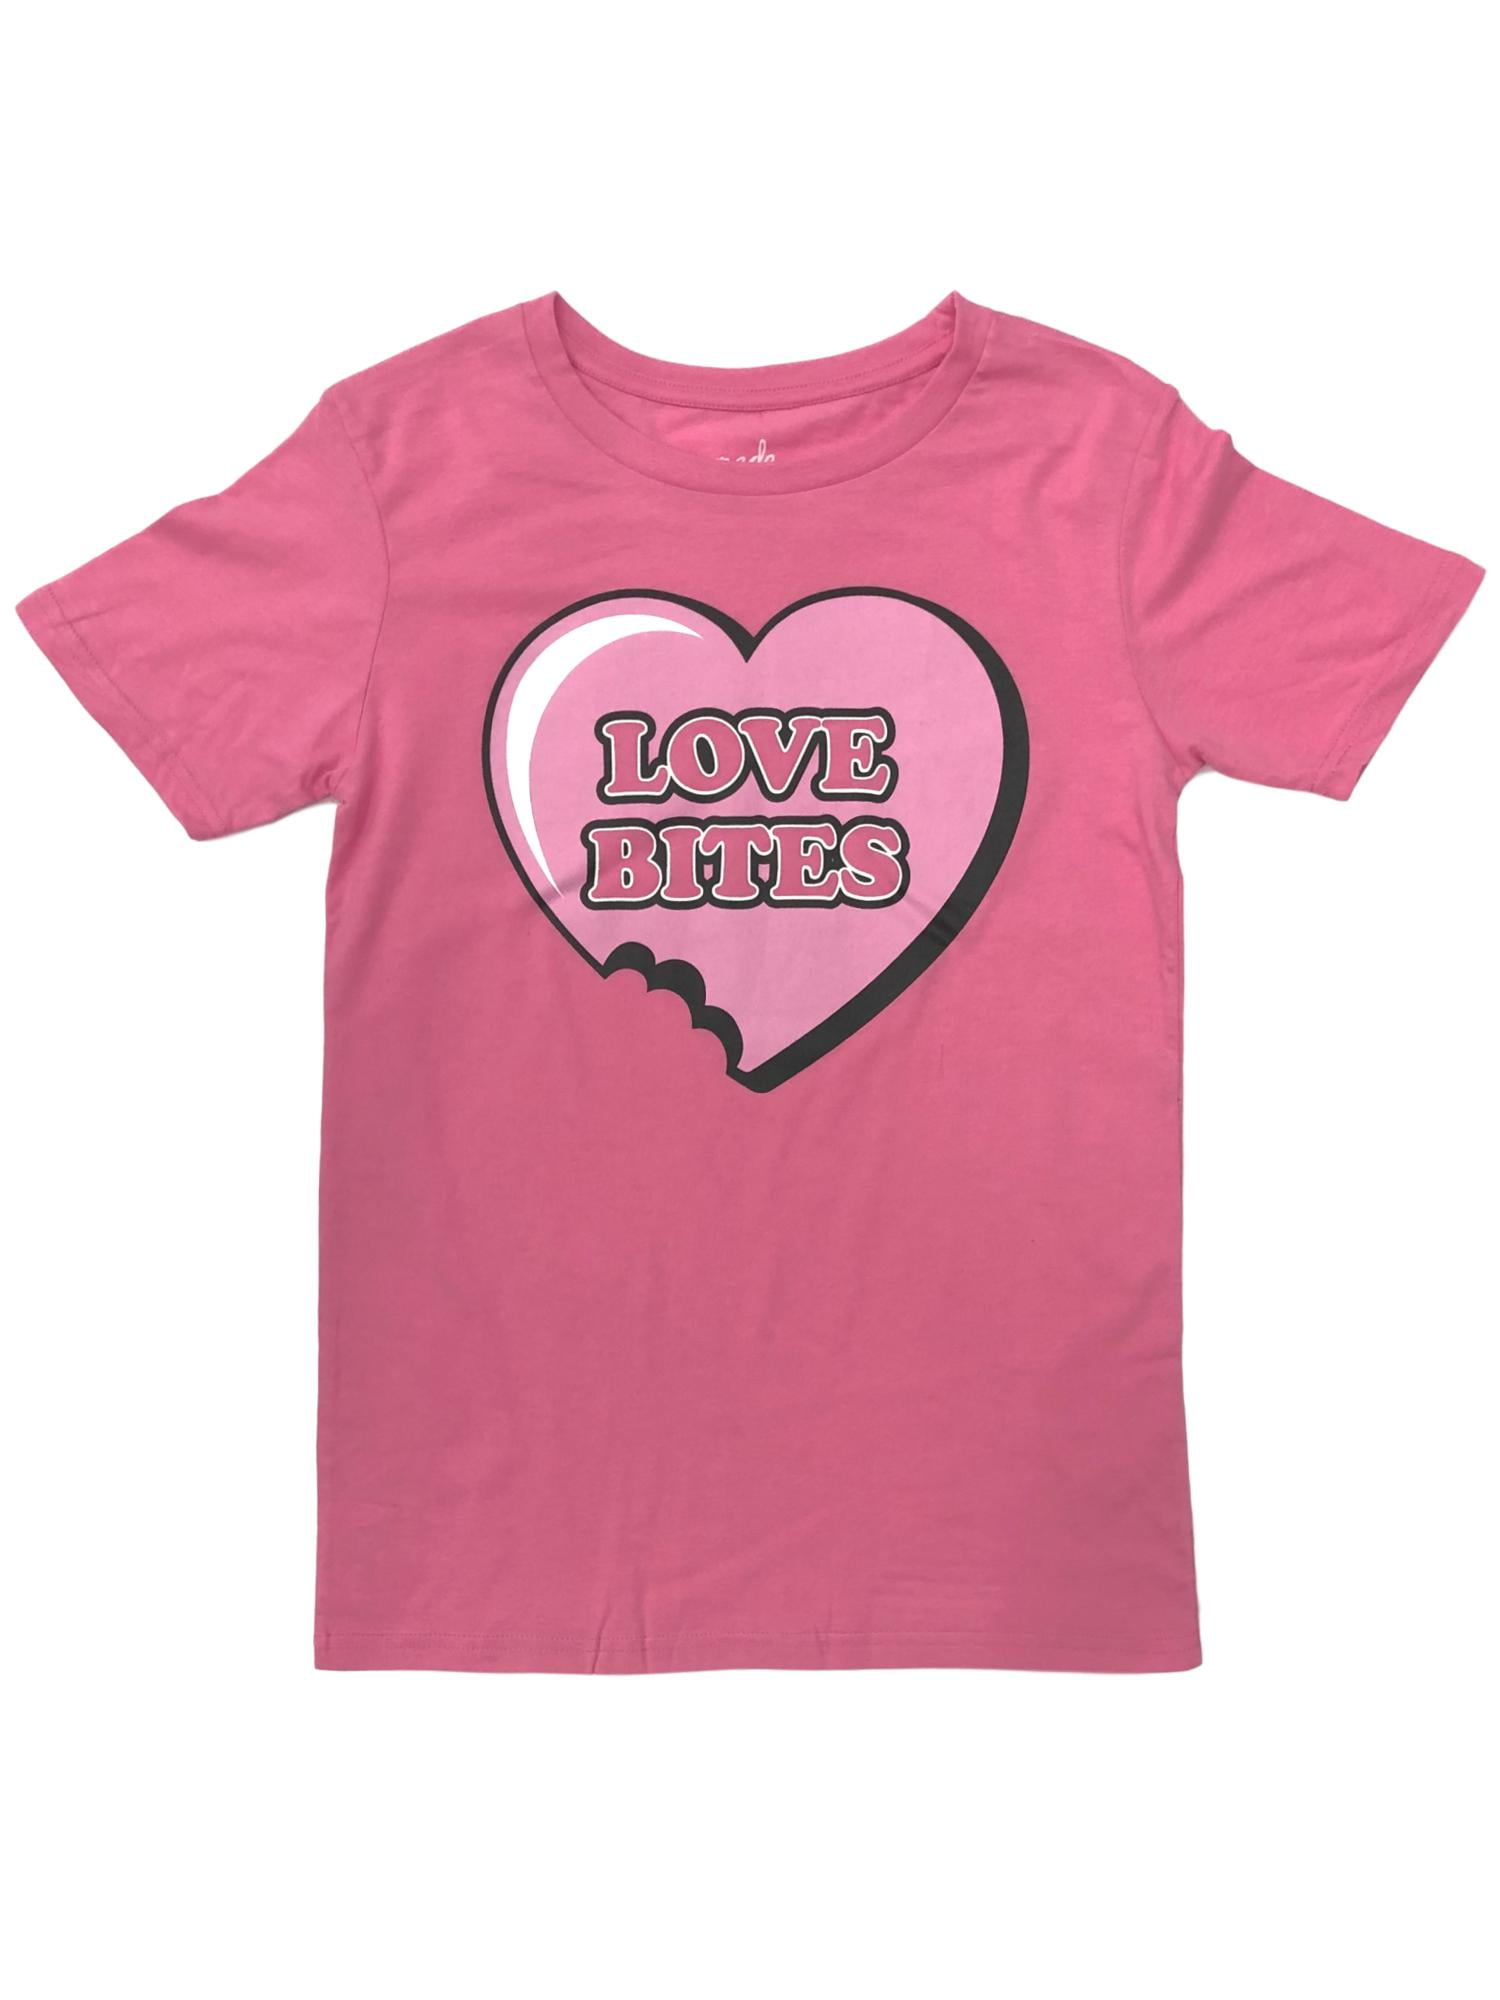 Pink Hearts For Mom Valentines Day tees Short-Sleeve Unisex T-Shirt Perfect For Him And Her Cute Valentine Gift For Women